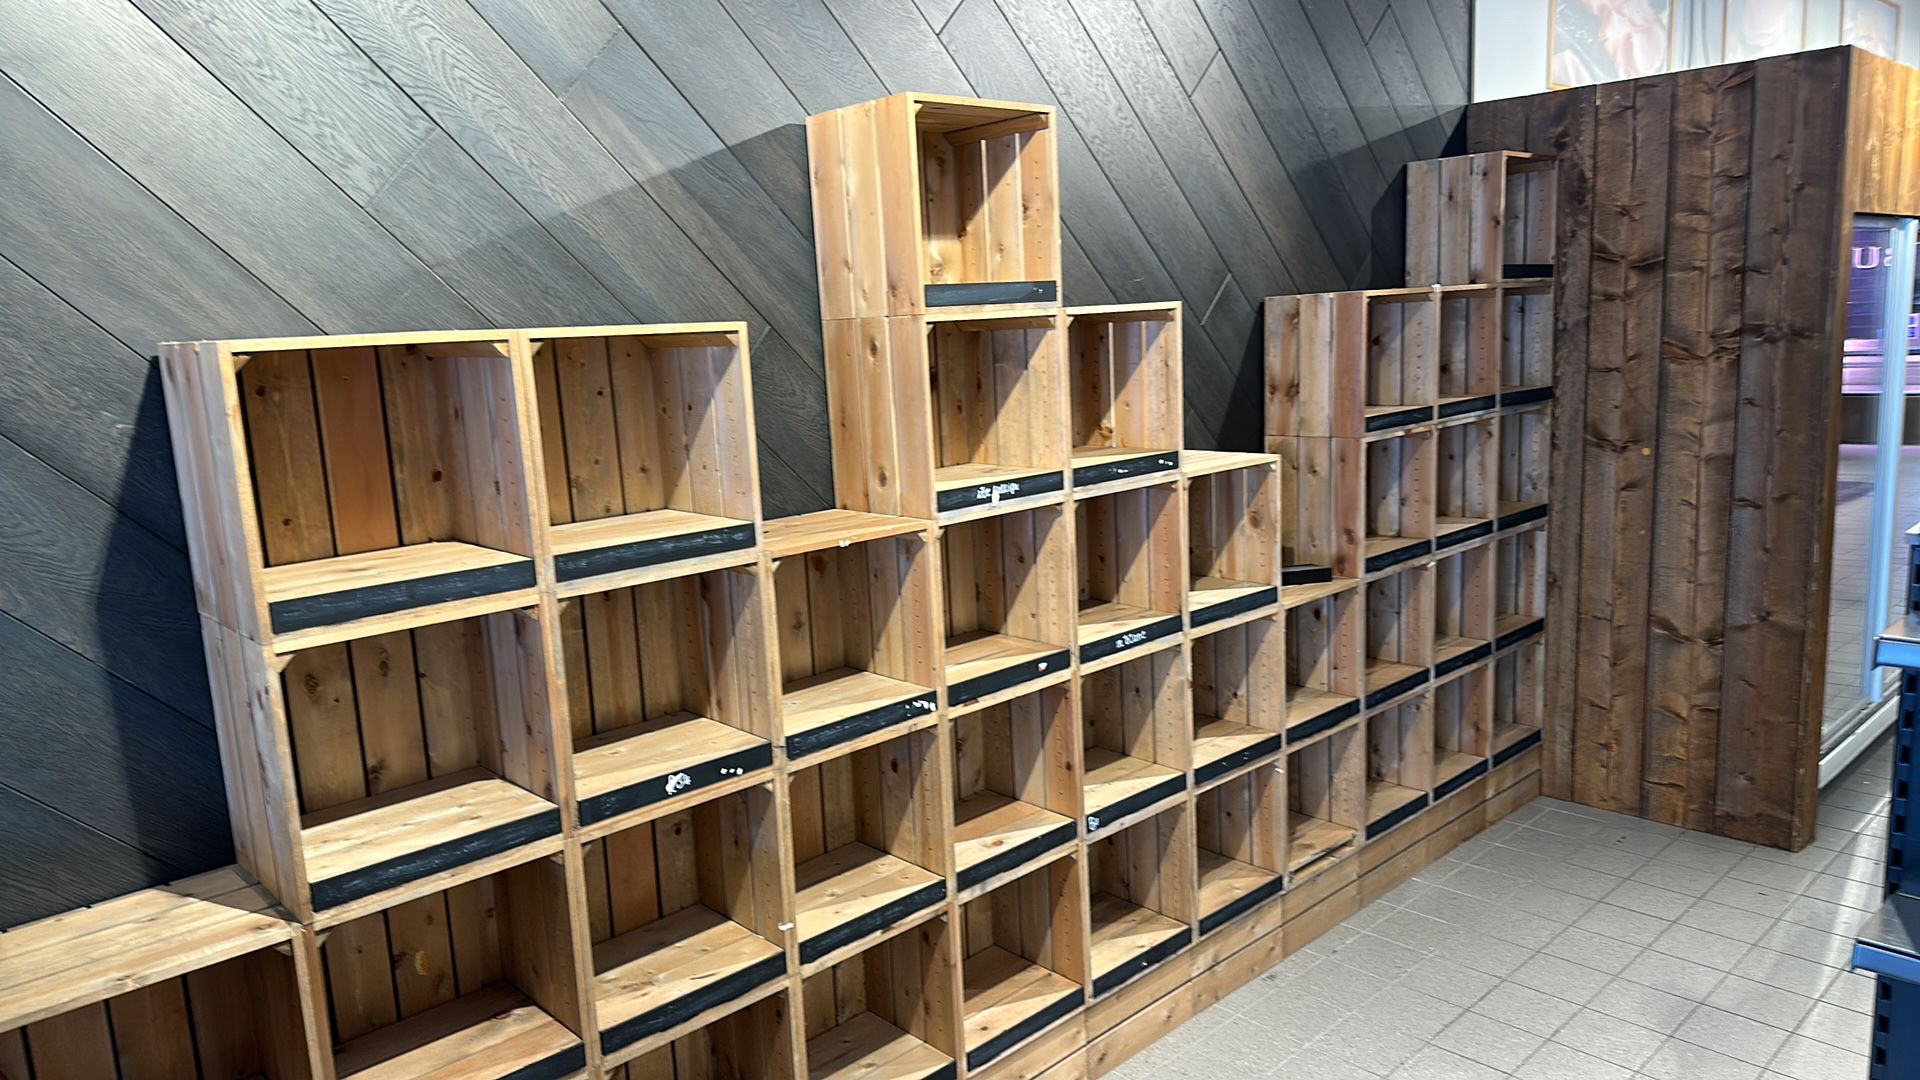 Wooden crate / pigeon hole display or storage - Image 4 of 5